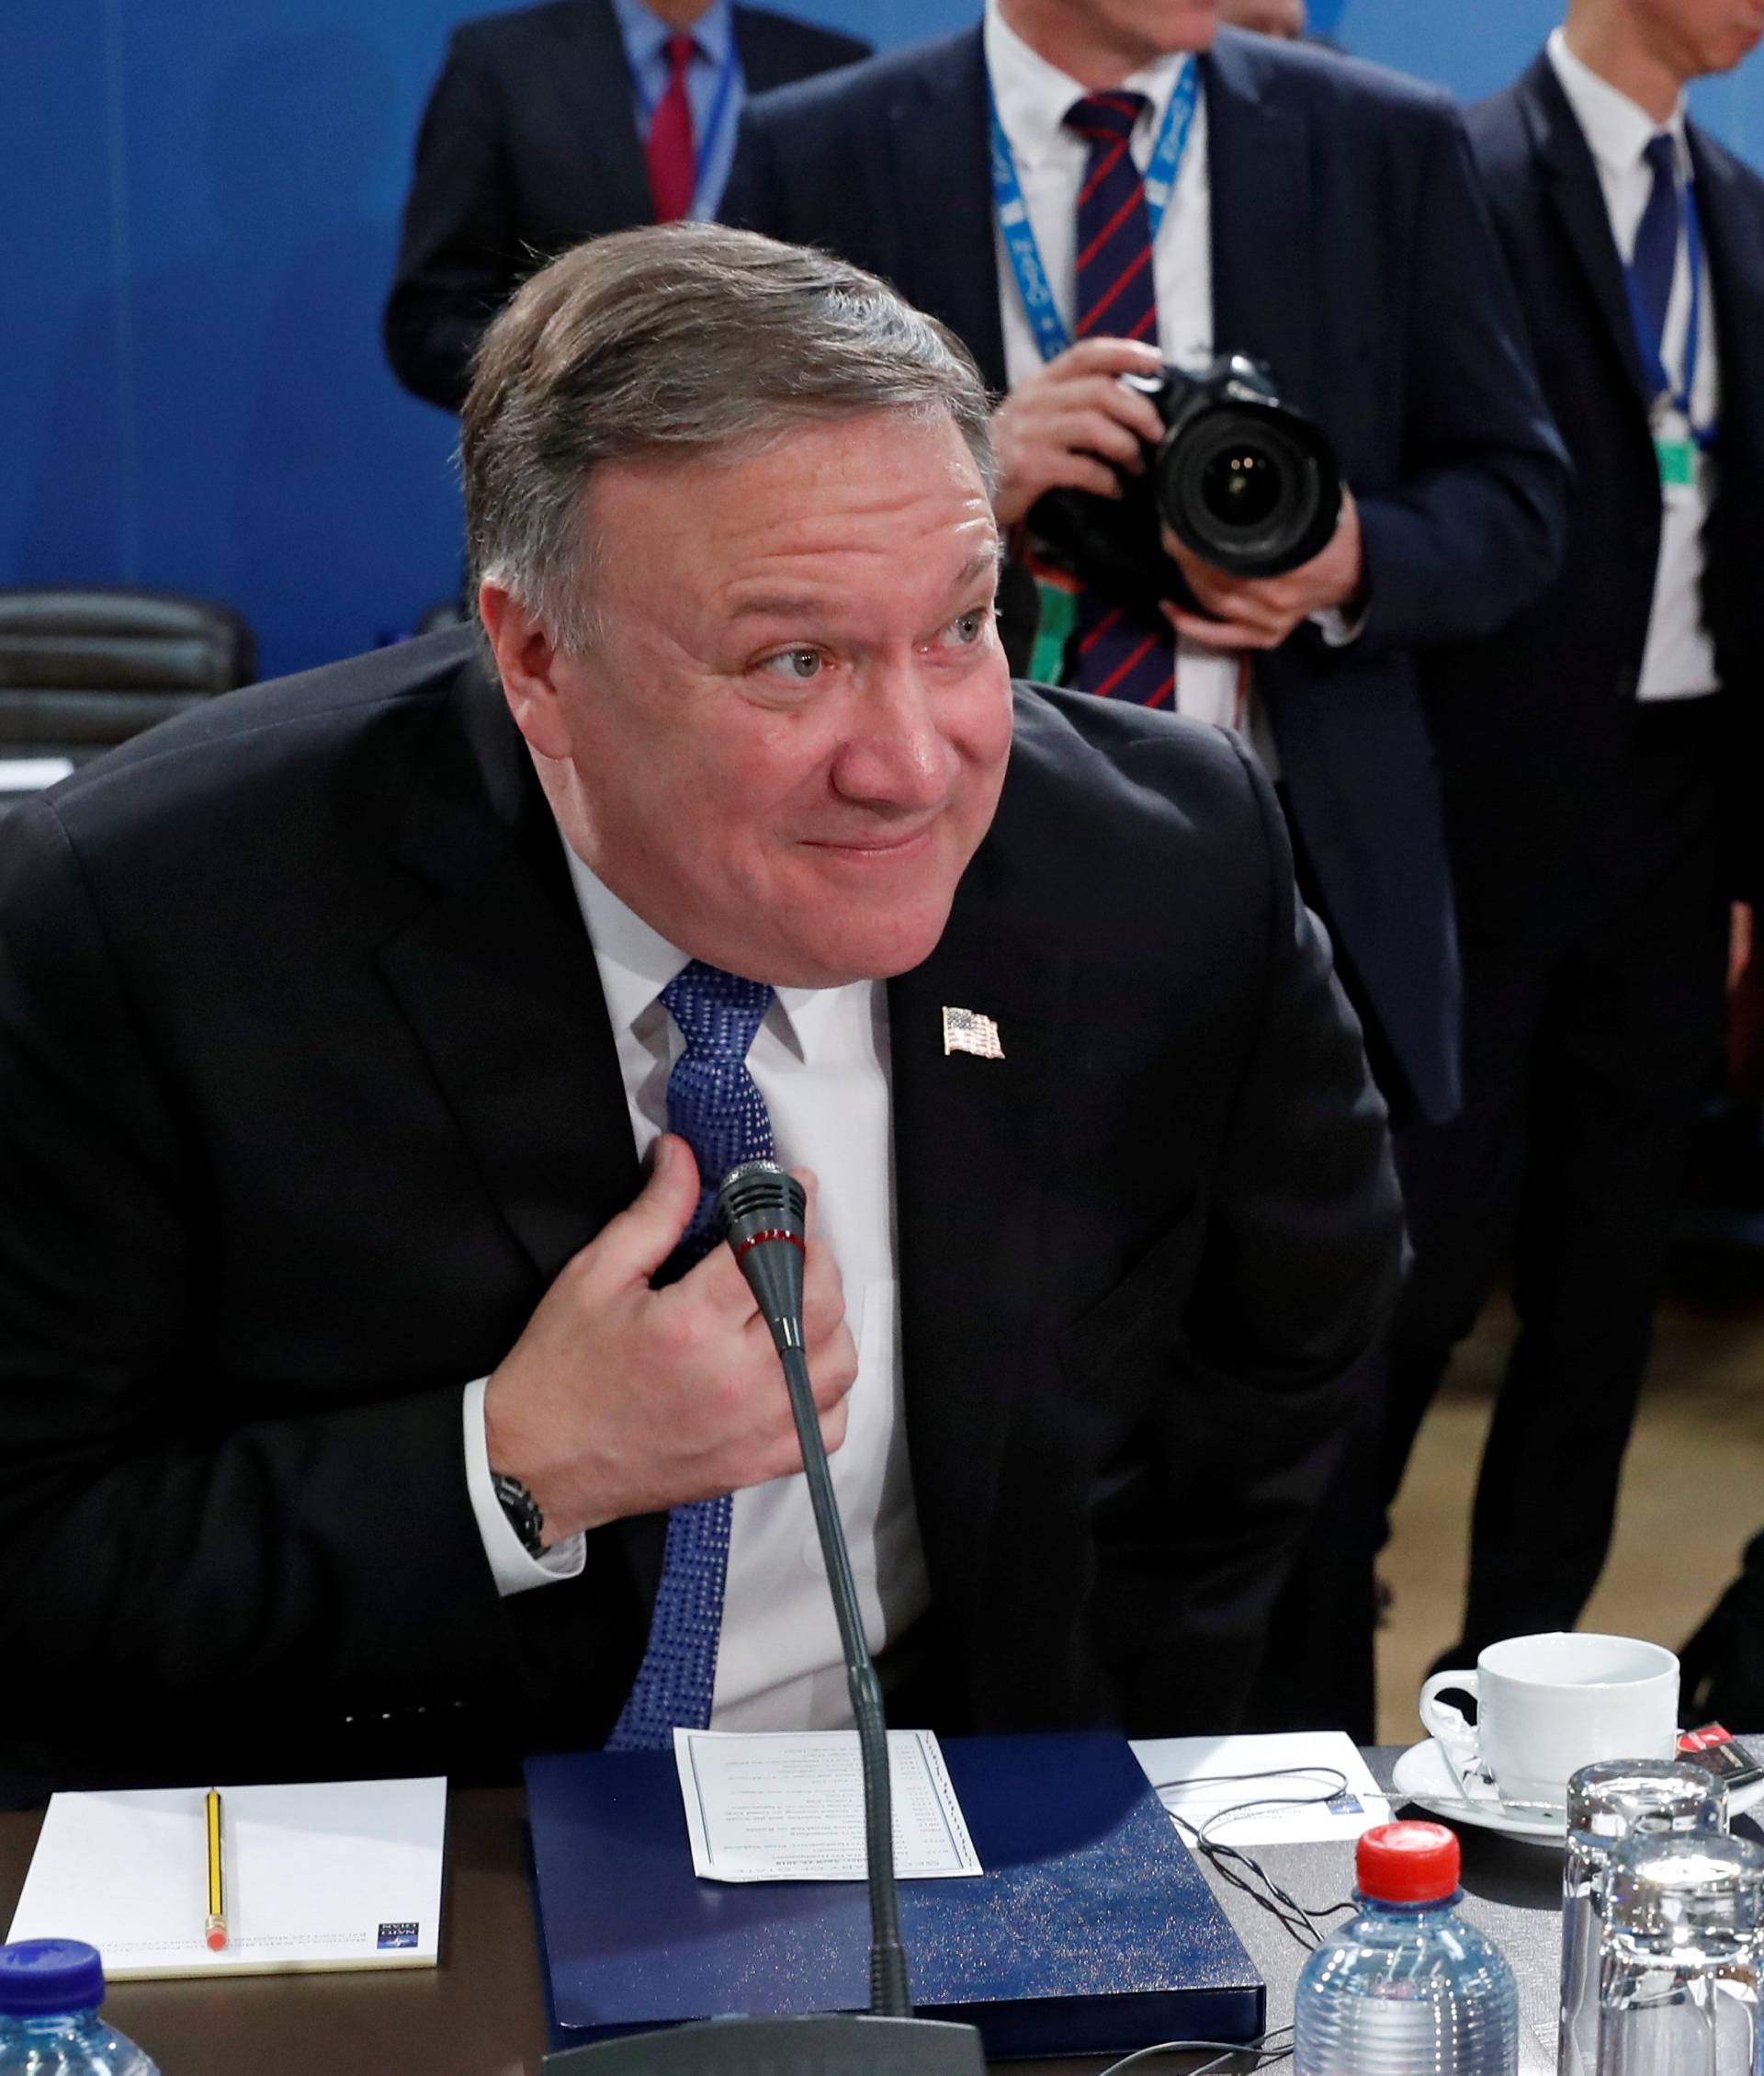 U.S. Secretary of State Mike Pompeo attends a NATO foreign ministers meeting at the Alliance's headquarters in Brussels